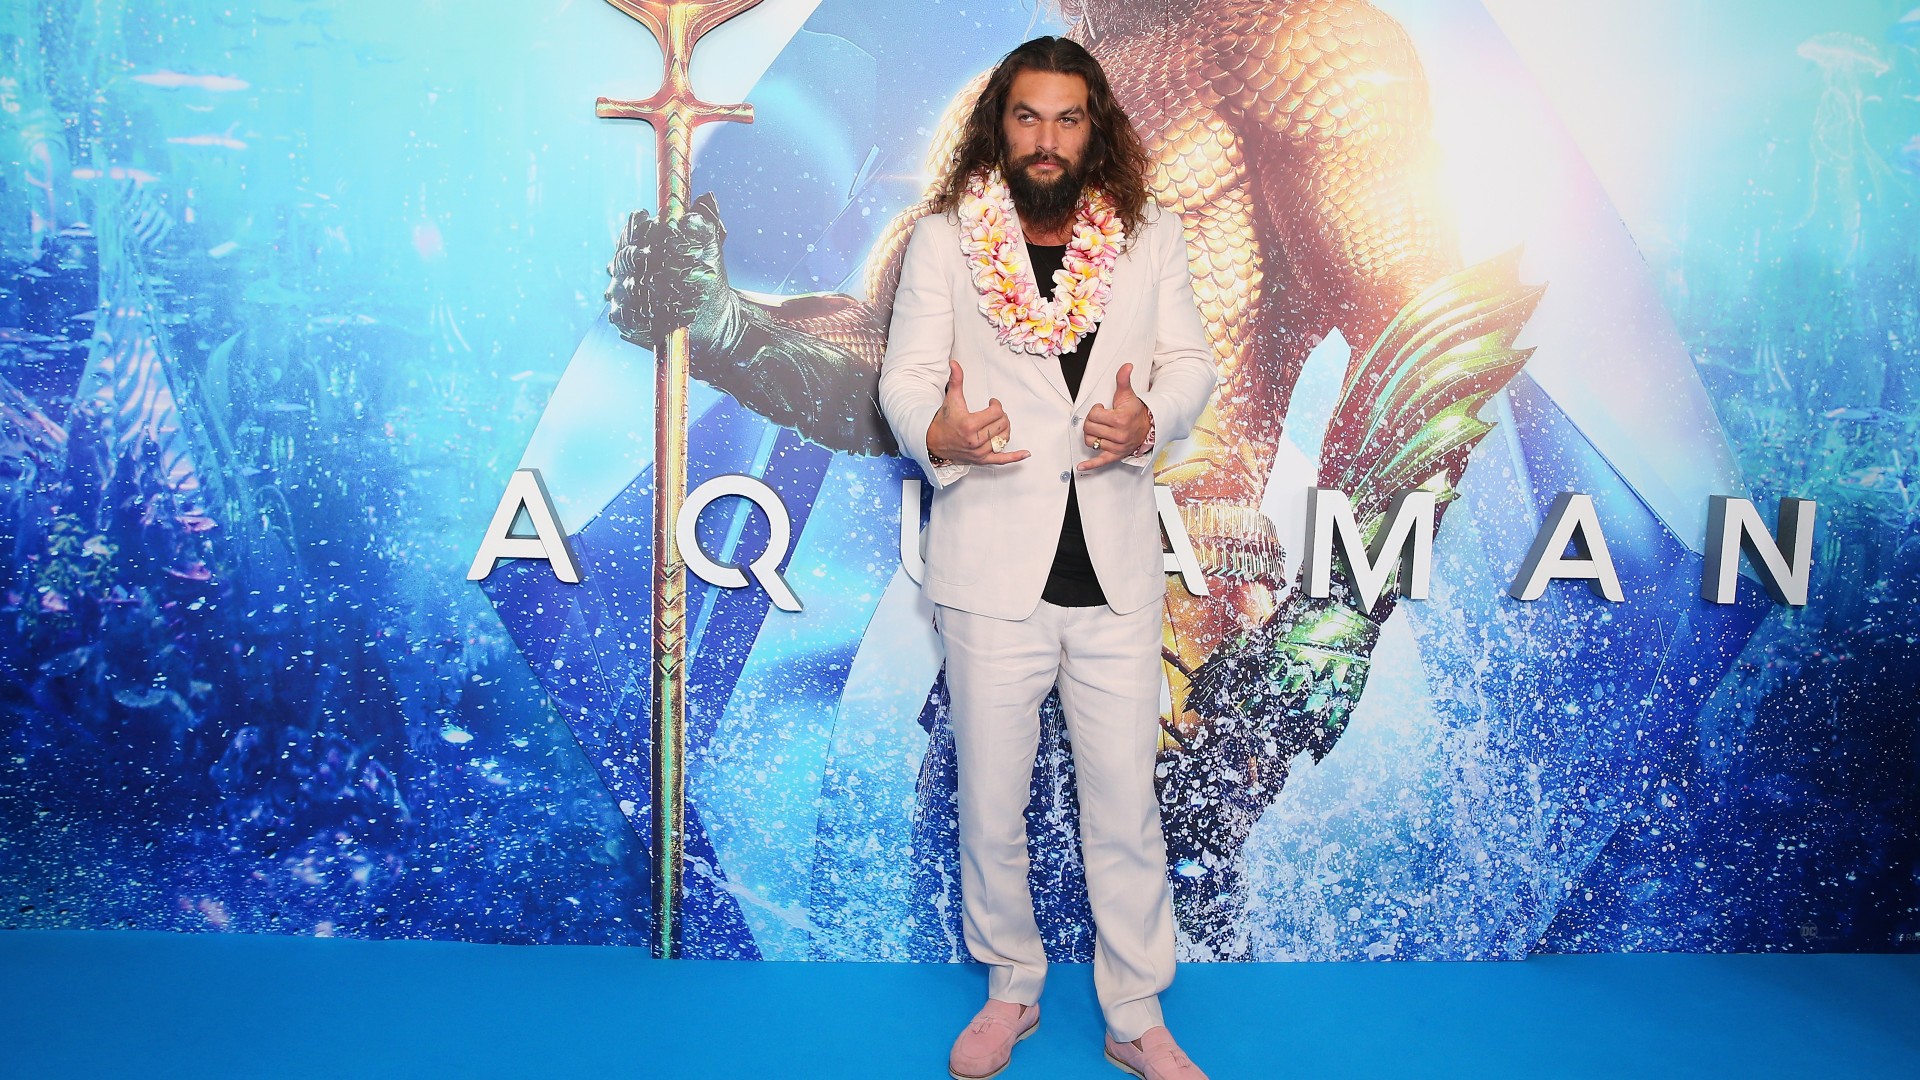 Aquaman’ sequel expected to earn less than half of original film’s opening weekend due to superhero genre’s challenges